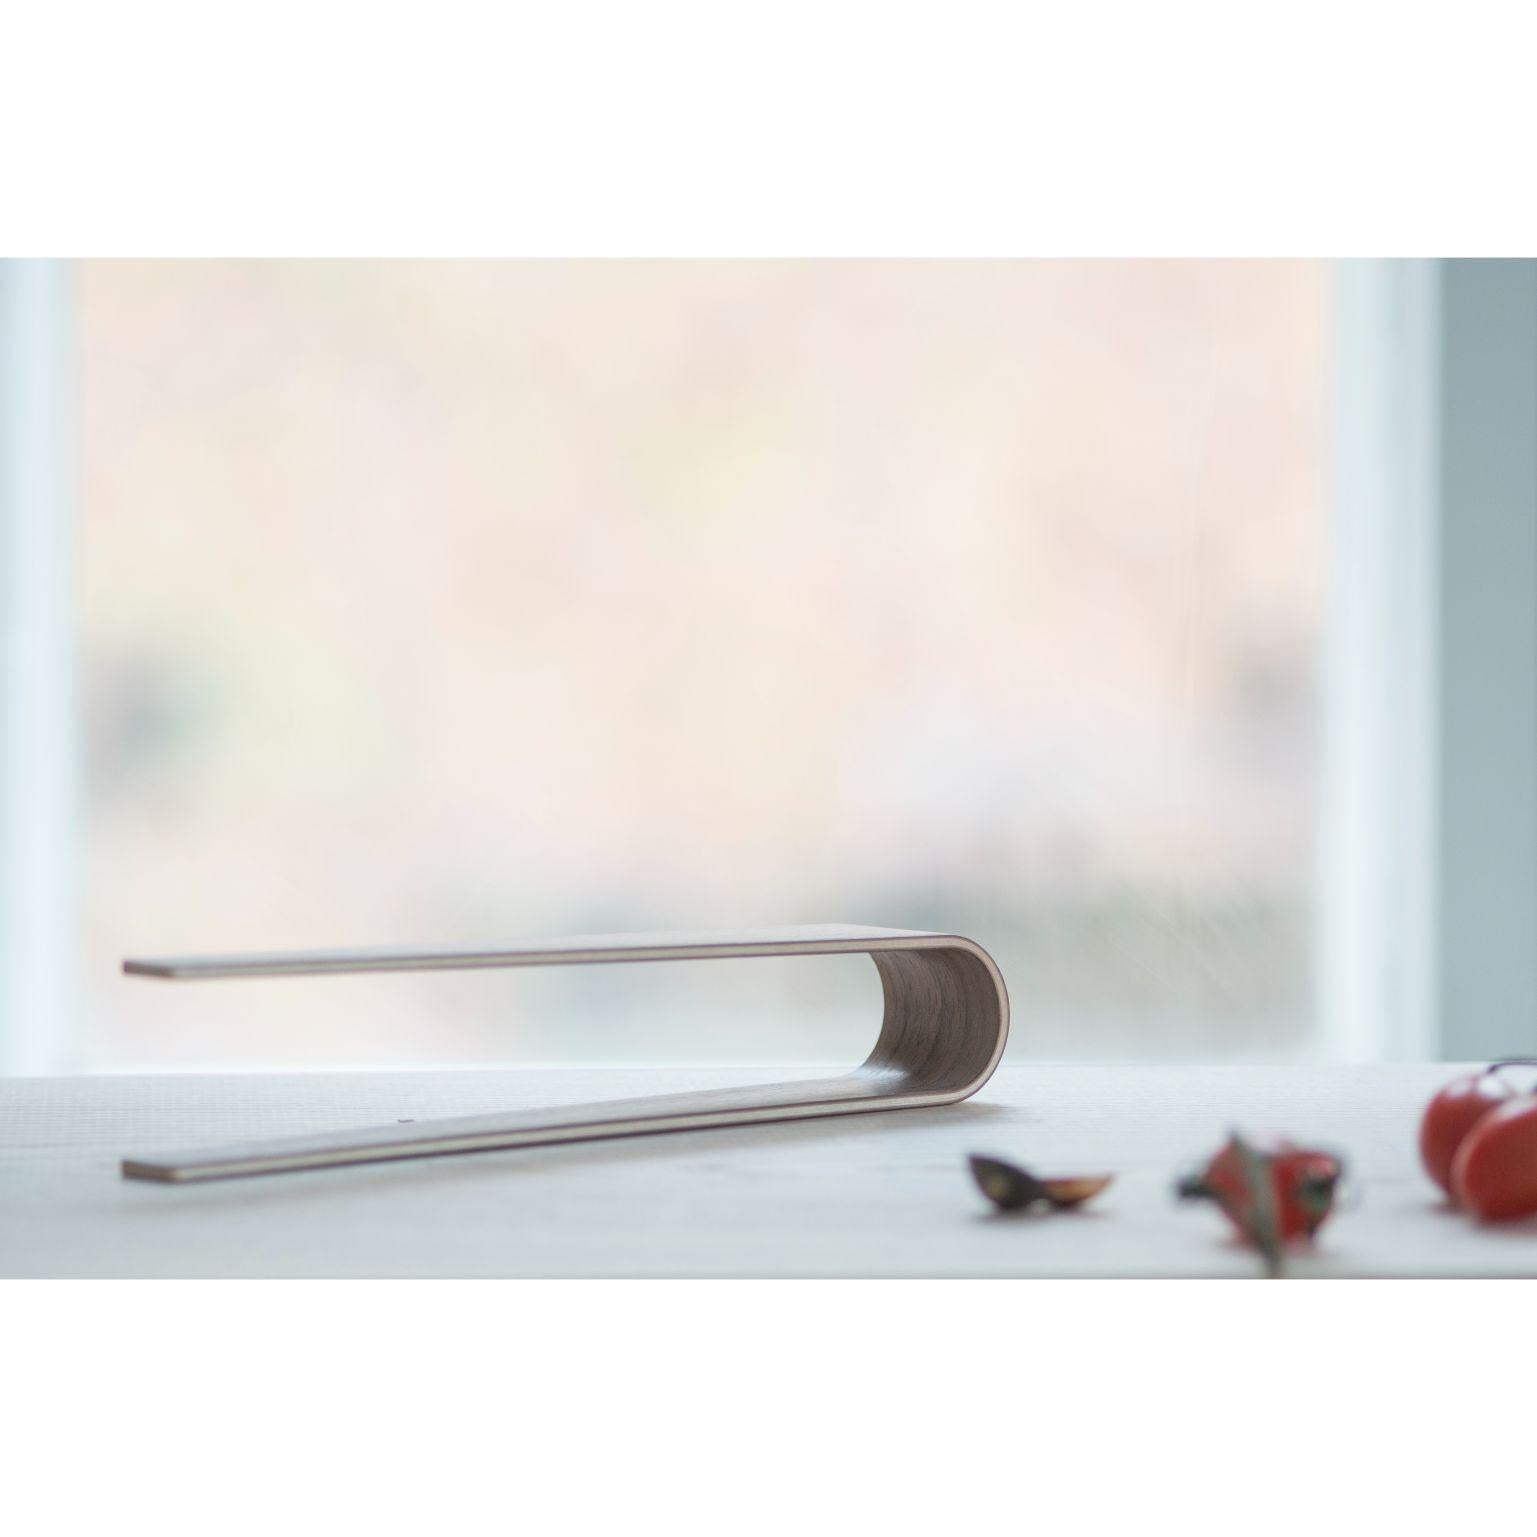 Nokka Tongs - Walnut by Antrei Hartikainen
Materials: Walnut, Maple, Natural Oil Wax
Dimensions: W 24,5 D 4/2 H 6 cm

Also Available in a variety of woods, please contact us 

Nokka tongs are suitable for serving a range of light foods